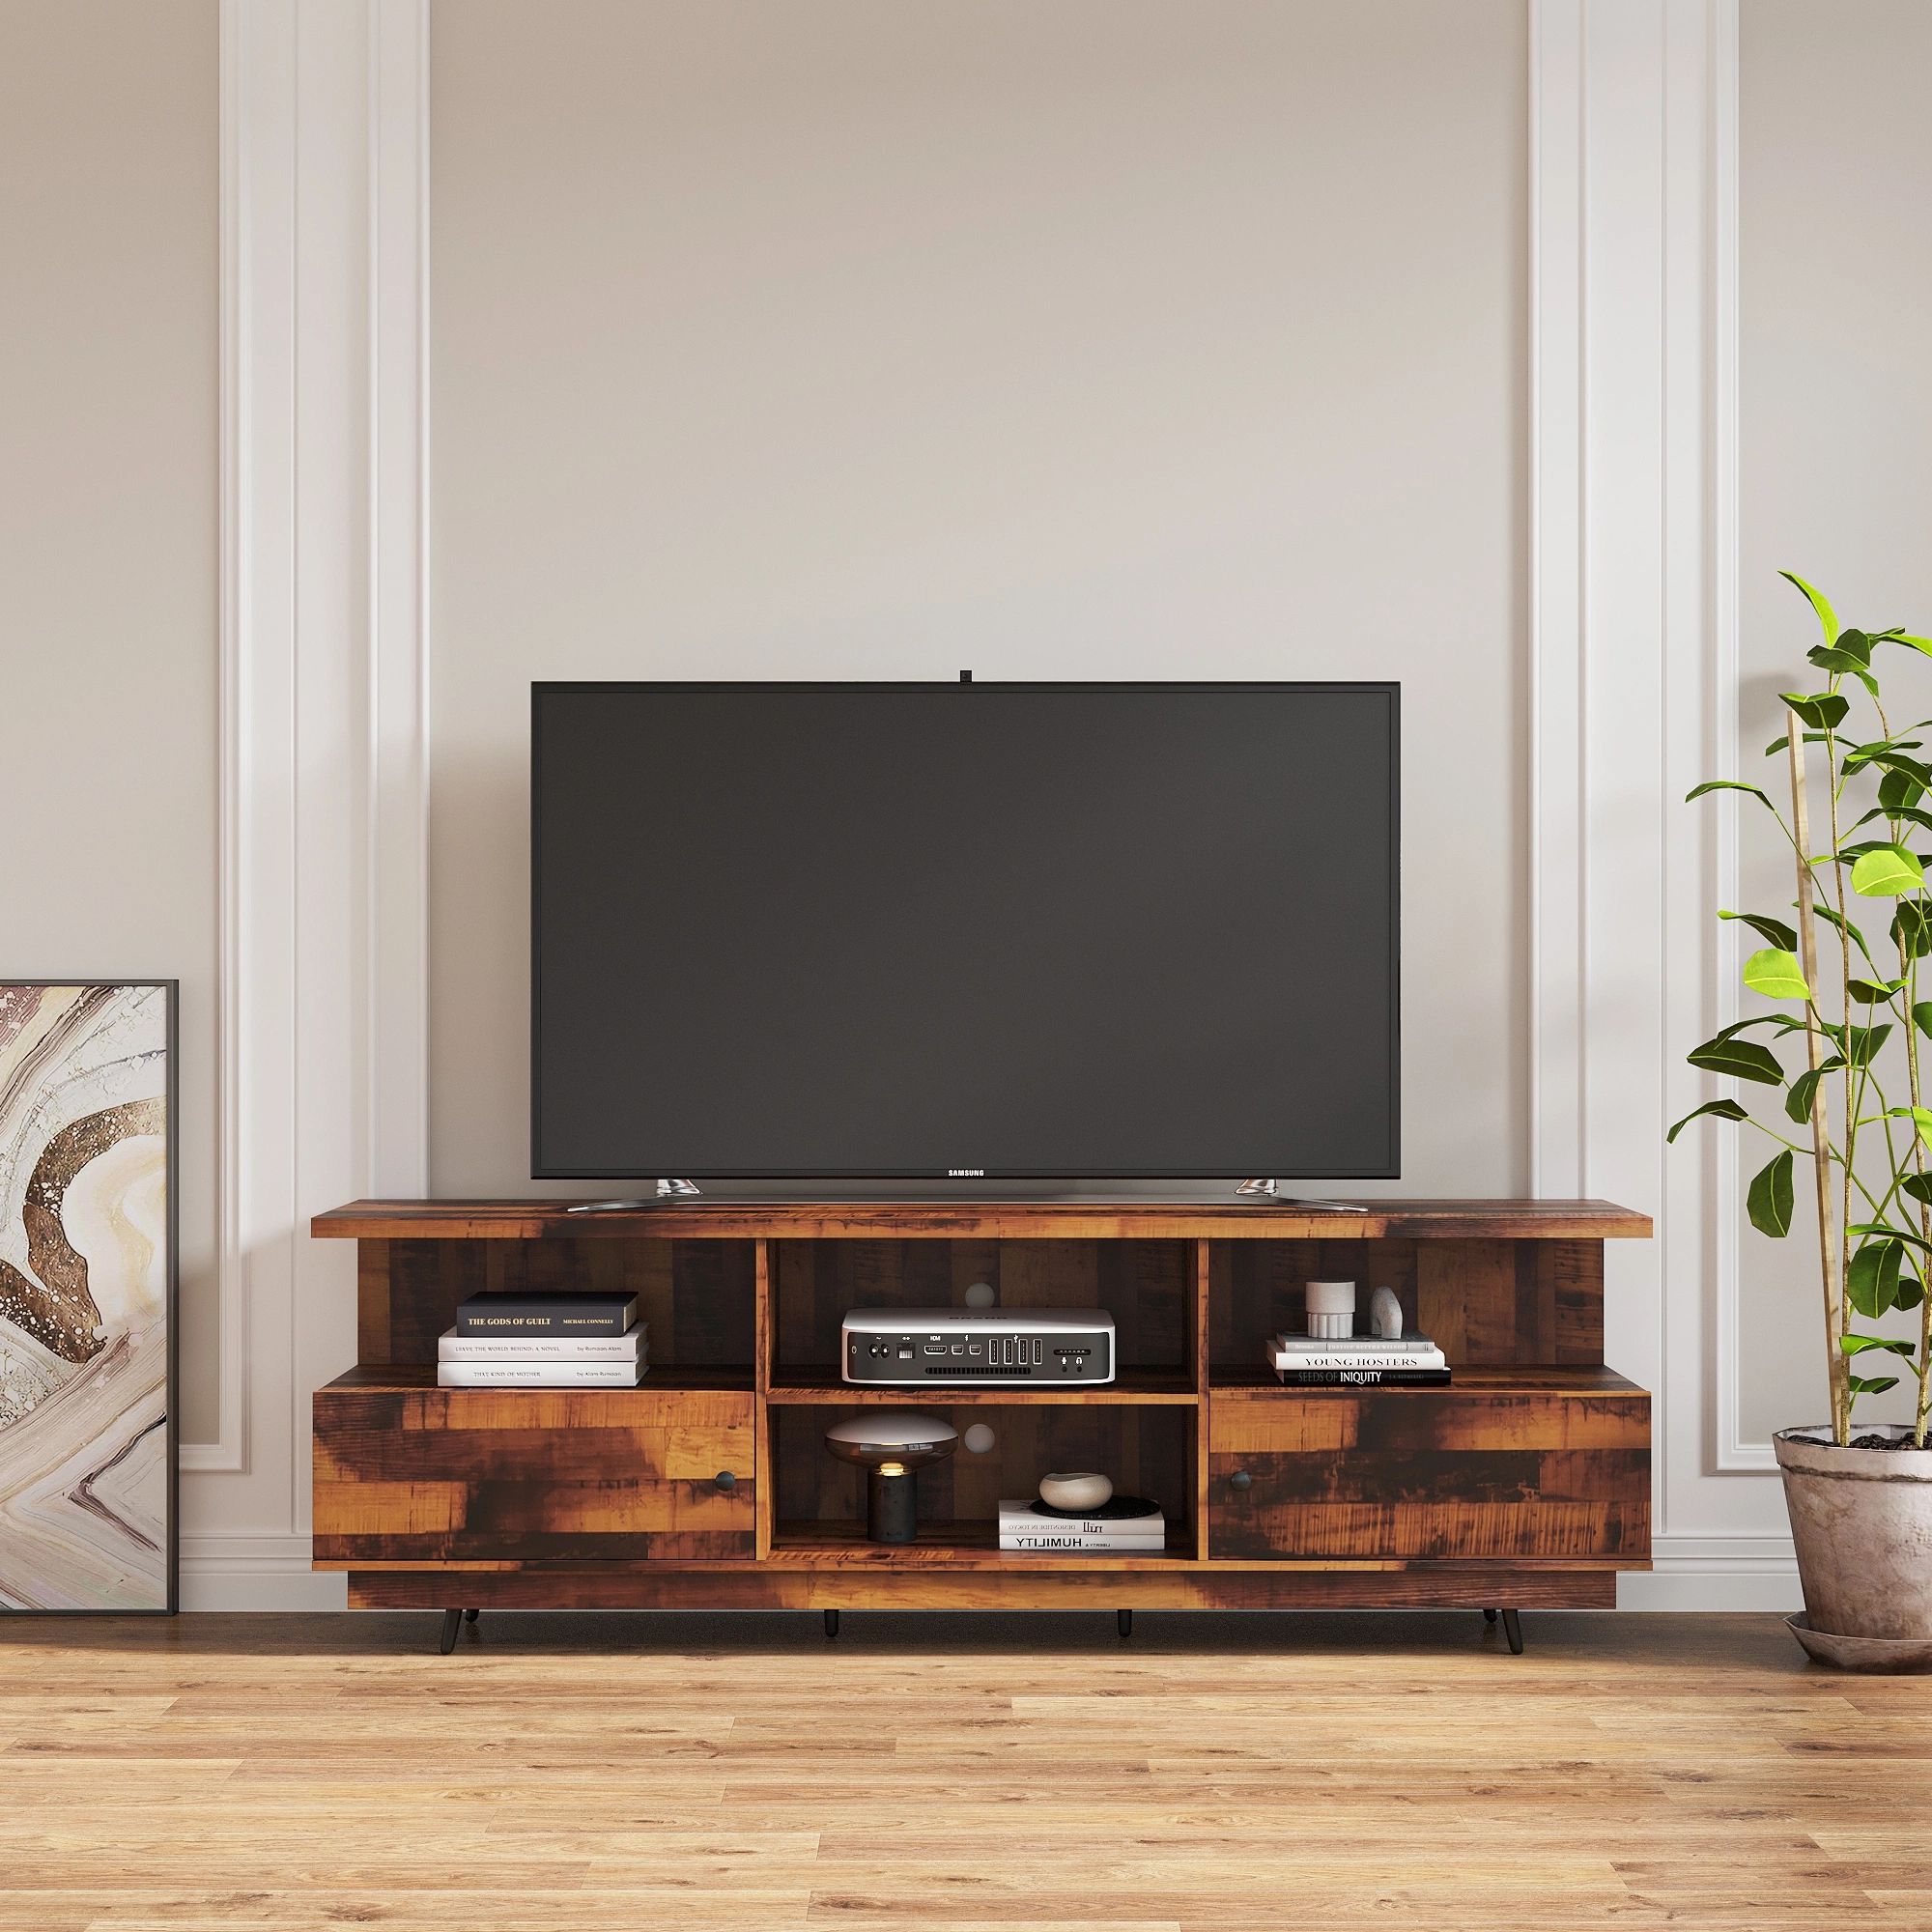 Dropship Tv Stand Modern Wood Media Entertainment Center Console Table With 2  Doors And 4 Open Shelves To Sell Online At A Lower Price | Doba Inside Tv Stands With 2 Doors And 2 Open Shelves (View 12 of 15)